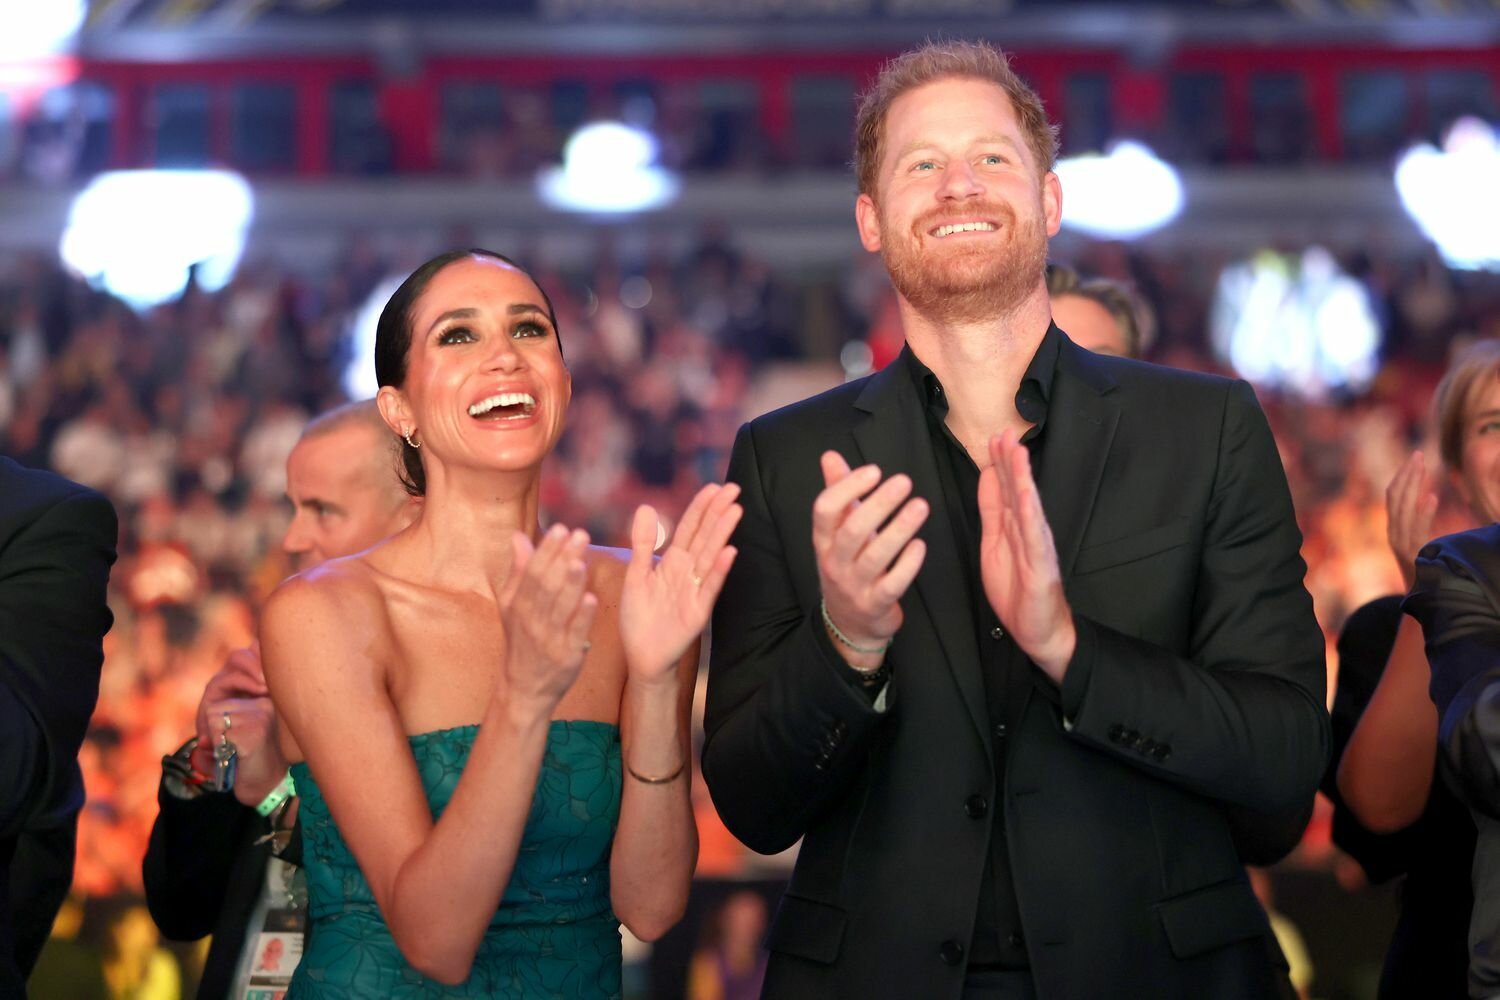 Prince Harry, Duke of Sussex, and Meghan, Duchess of Sussex 2023 Invictus Games